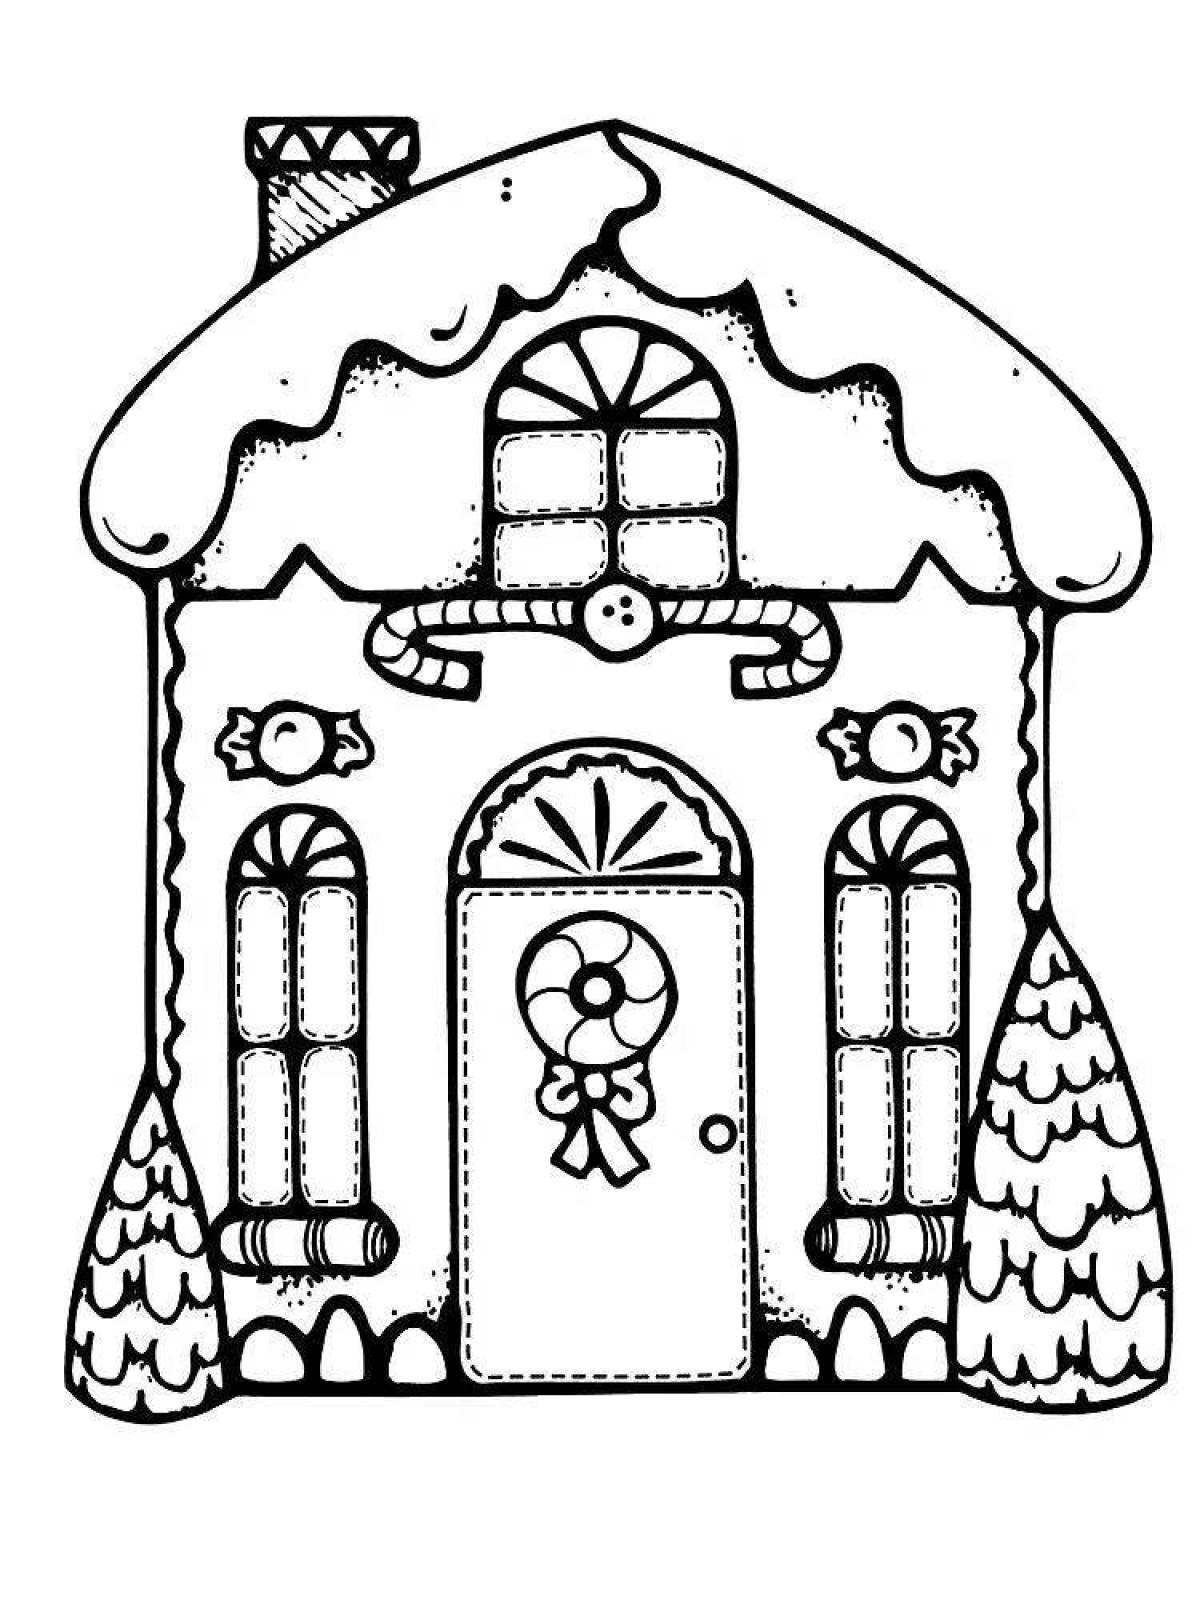 Wonderful gingerbread house coloring book for kids